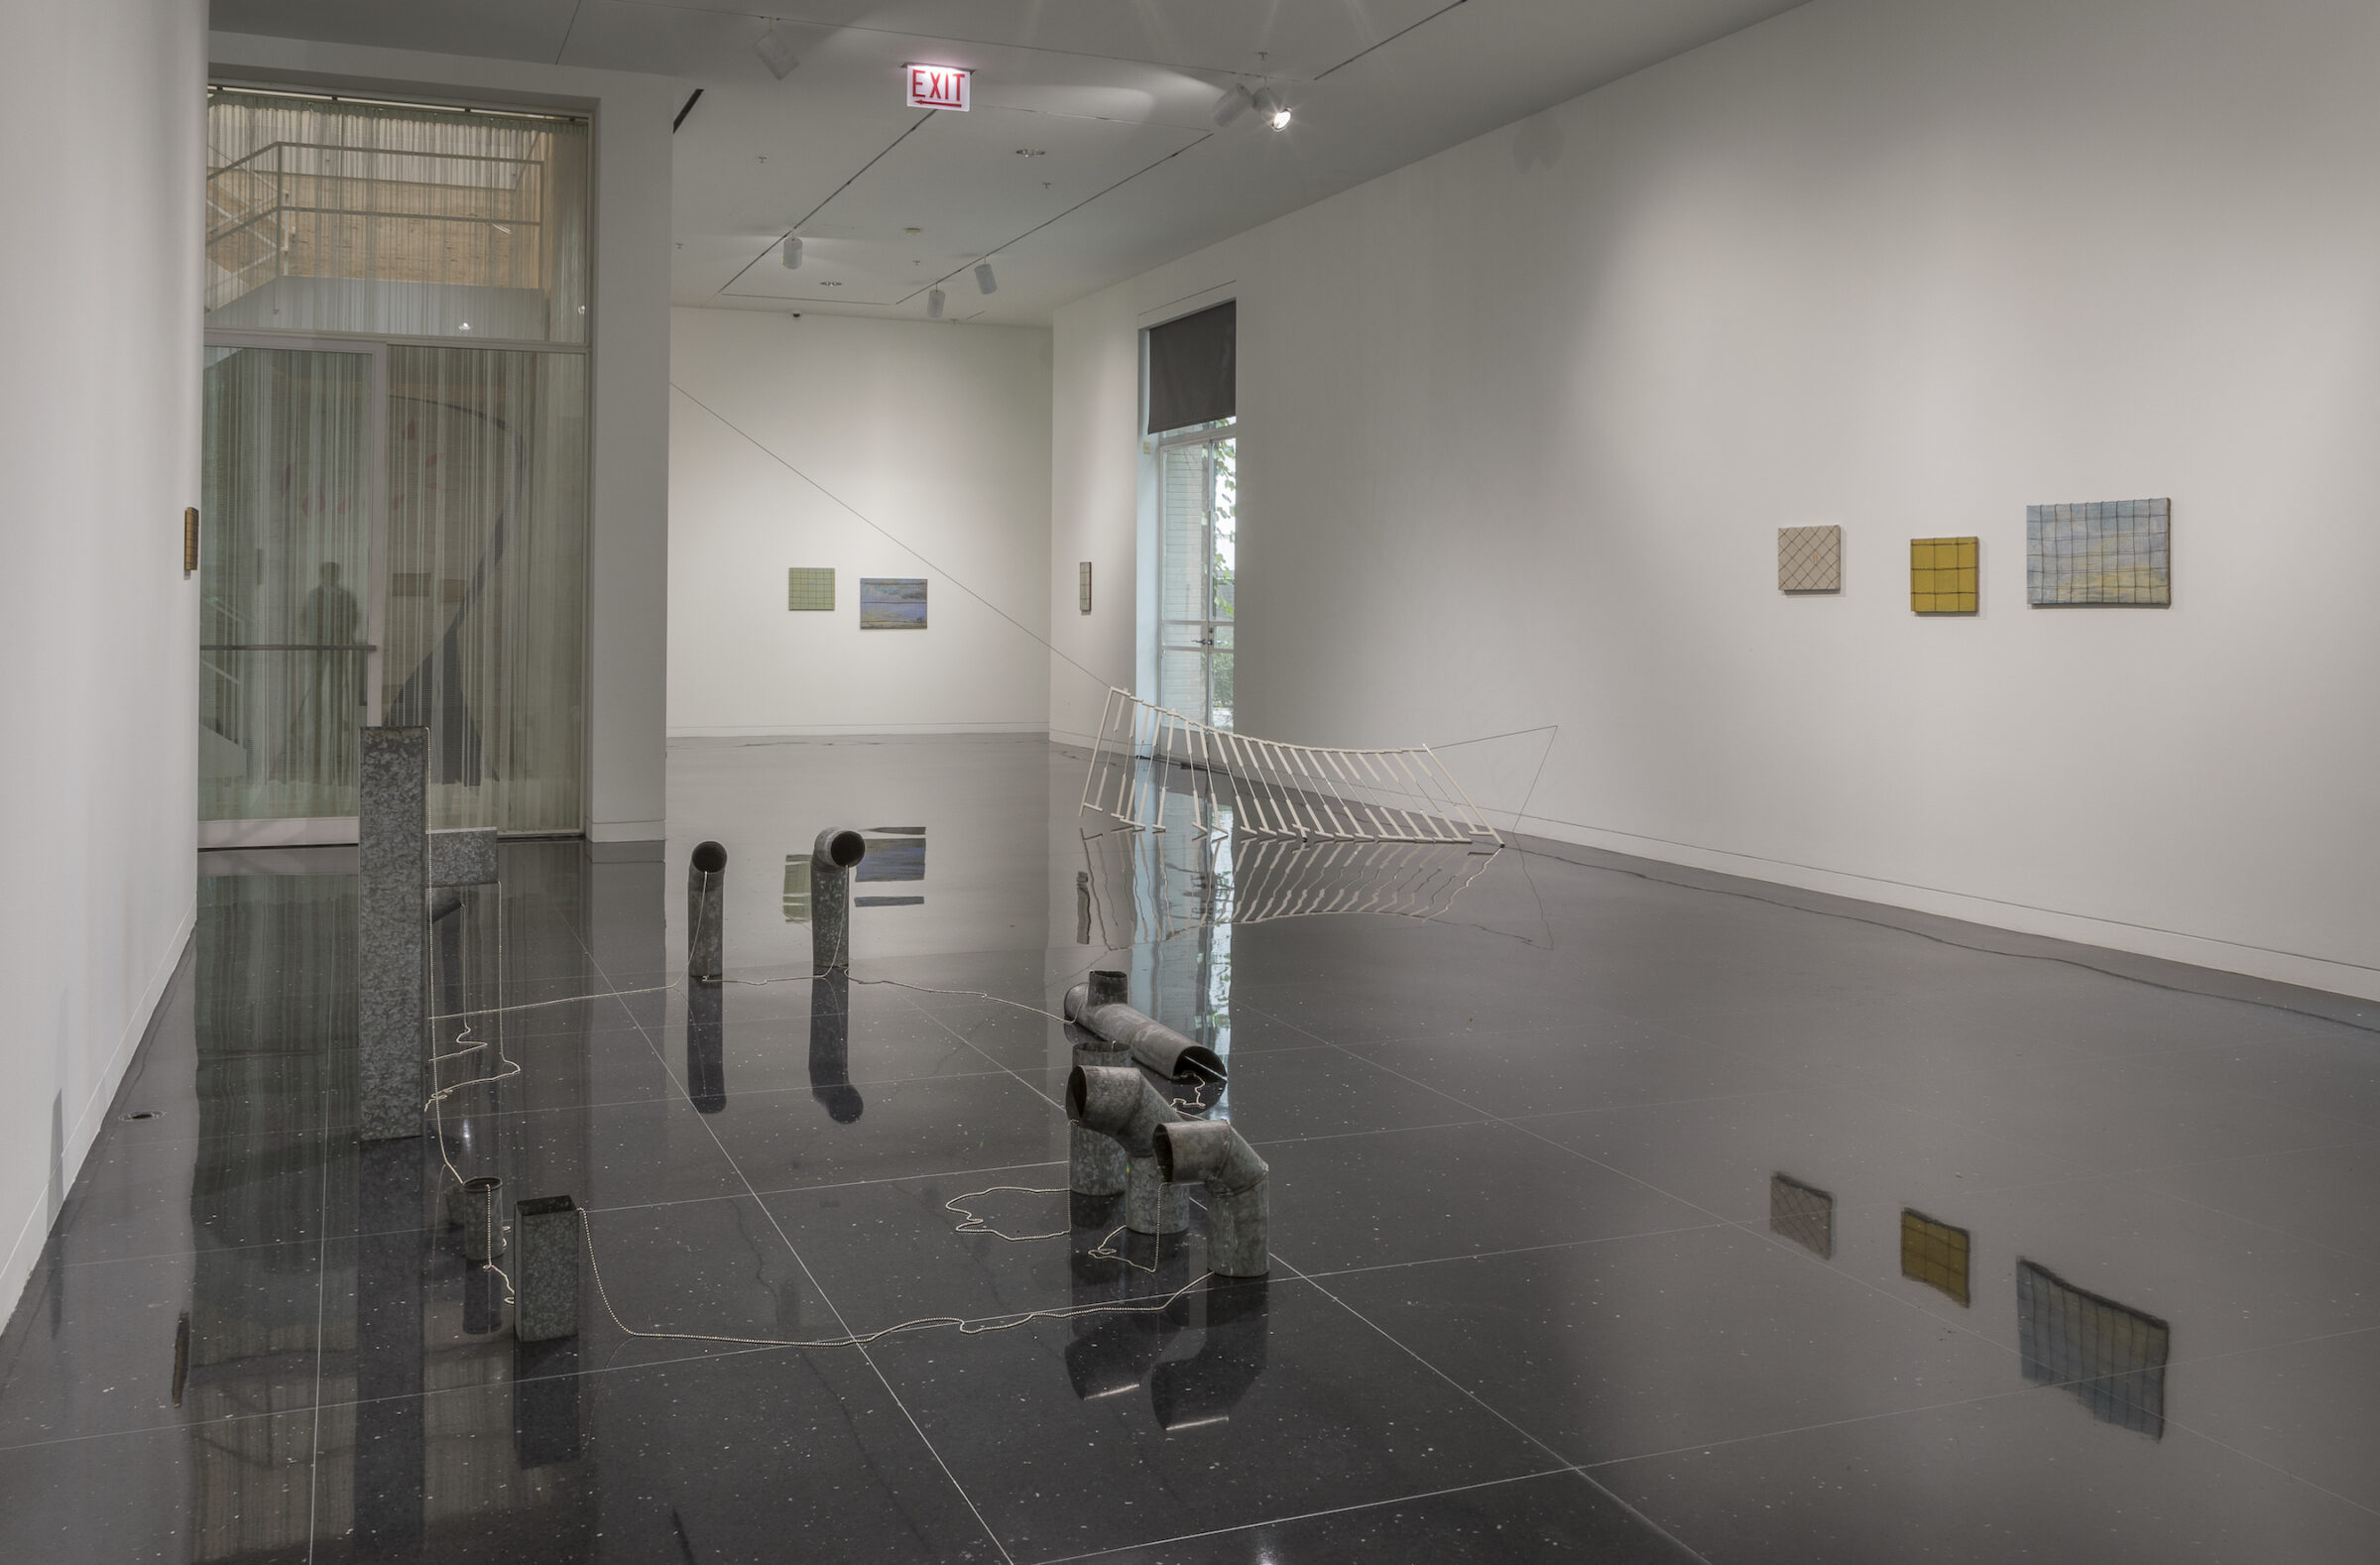 Installation view of a white-walled gallery with sculptures suspended from the walls and on the gallery floor. A series of bent exhaust pipes arranged in a circle are visible.